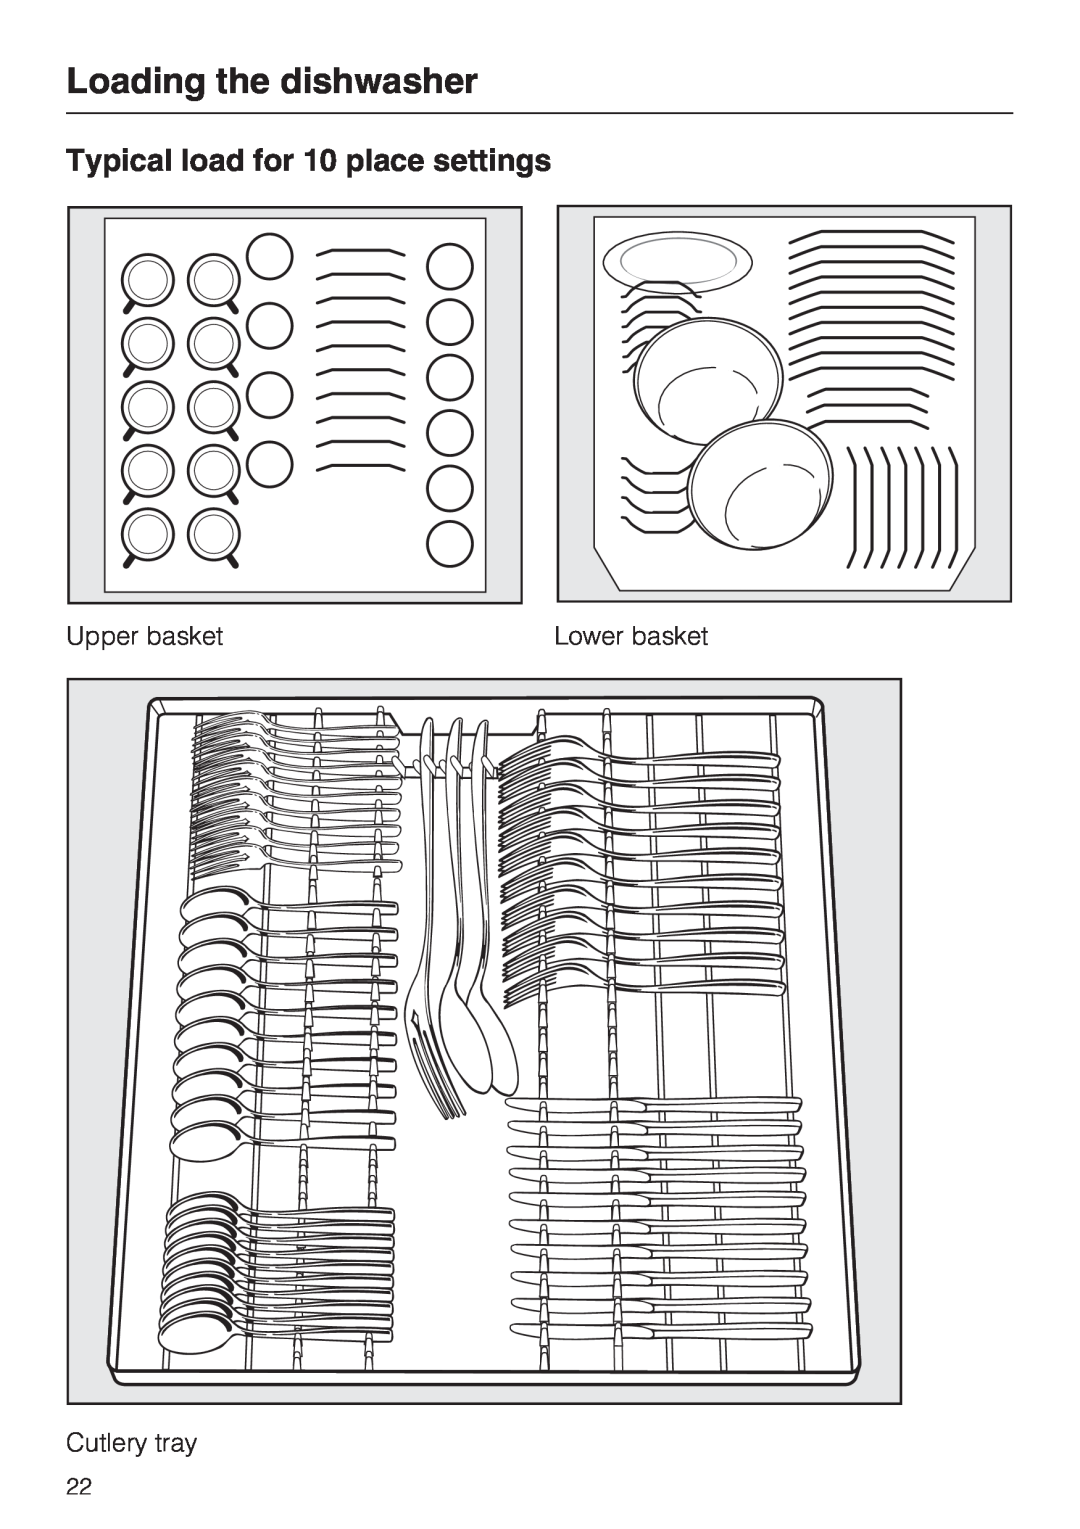 Miele G 5915, G 5910 Typical load for 10 place settings, Loading the dishwasher, Upper basket, Lower basket, Cutlery tray 